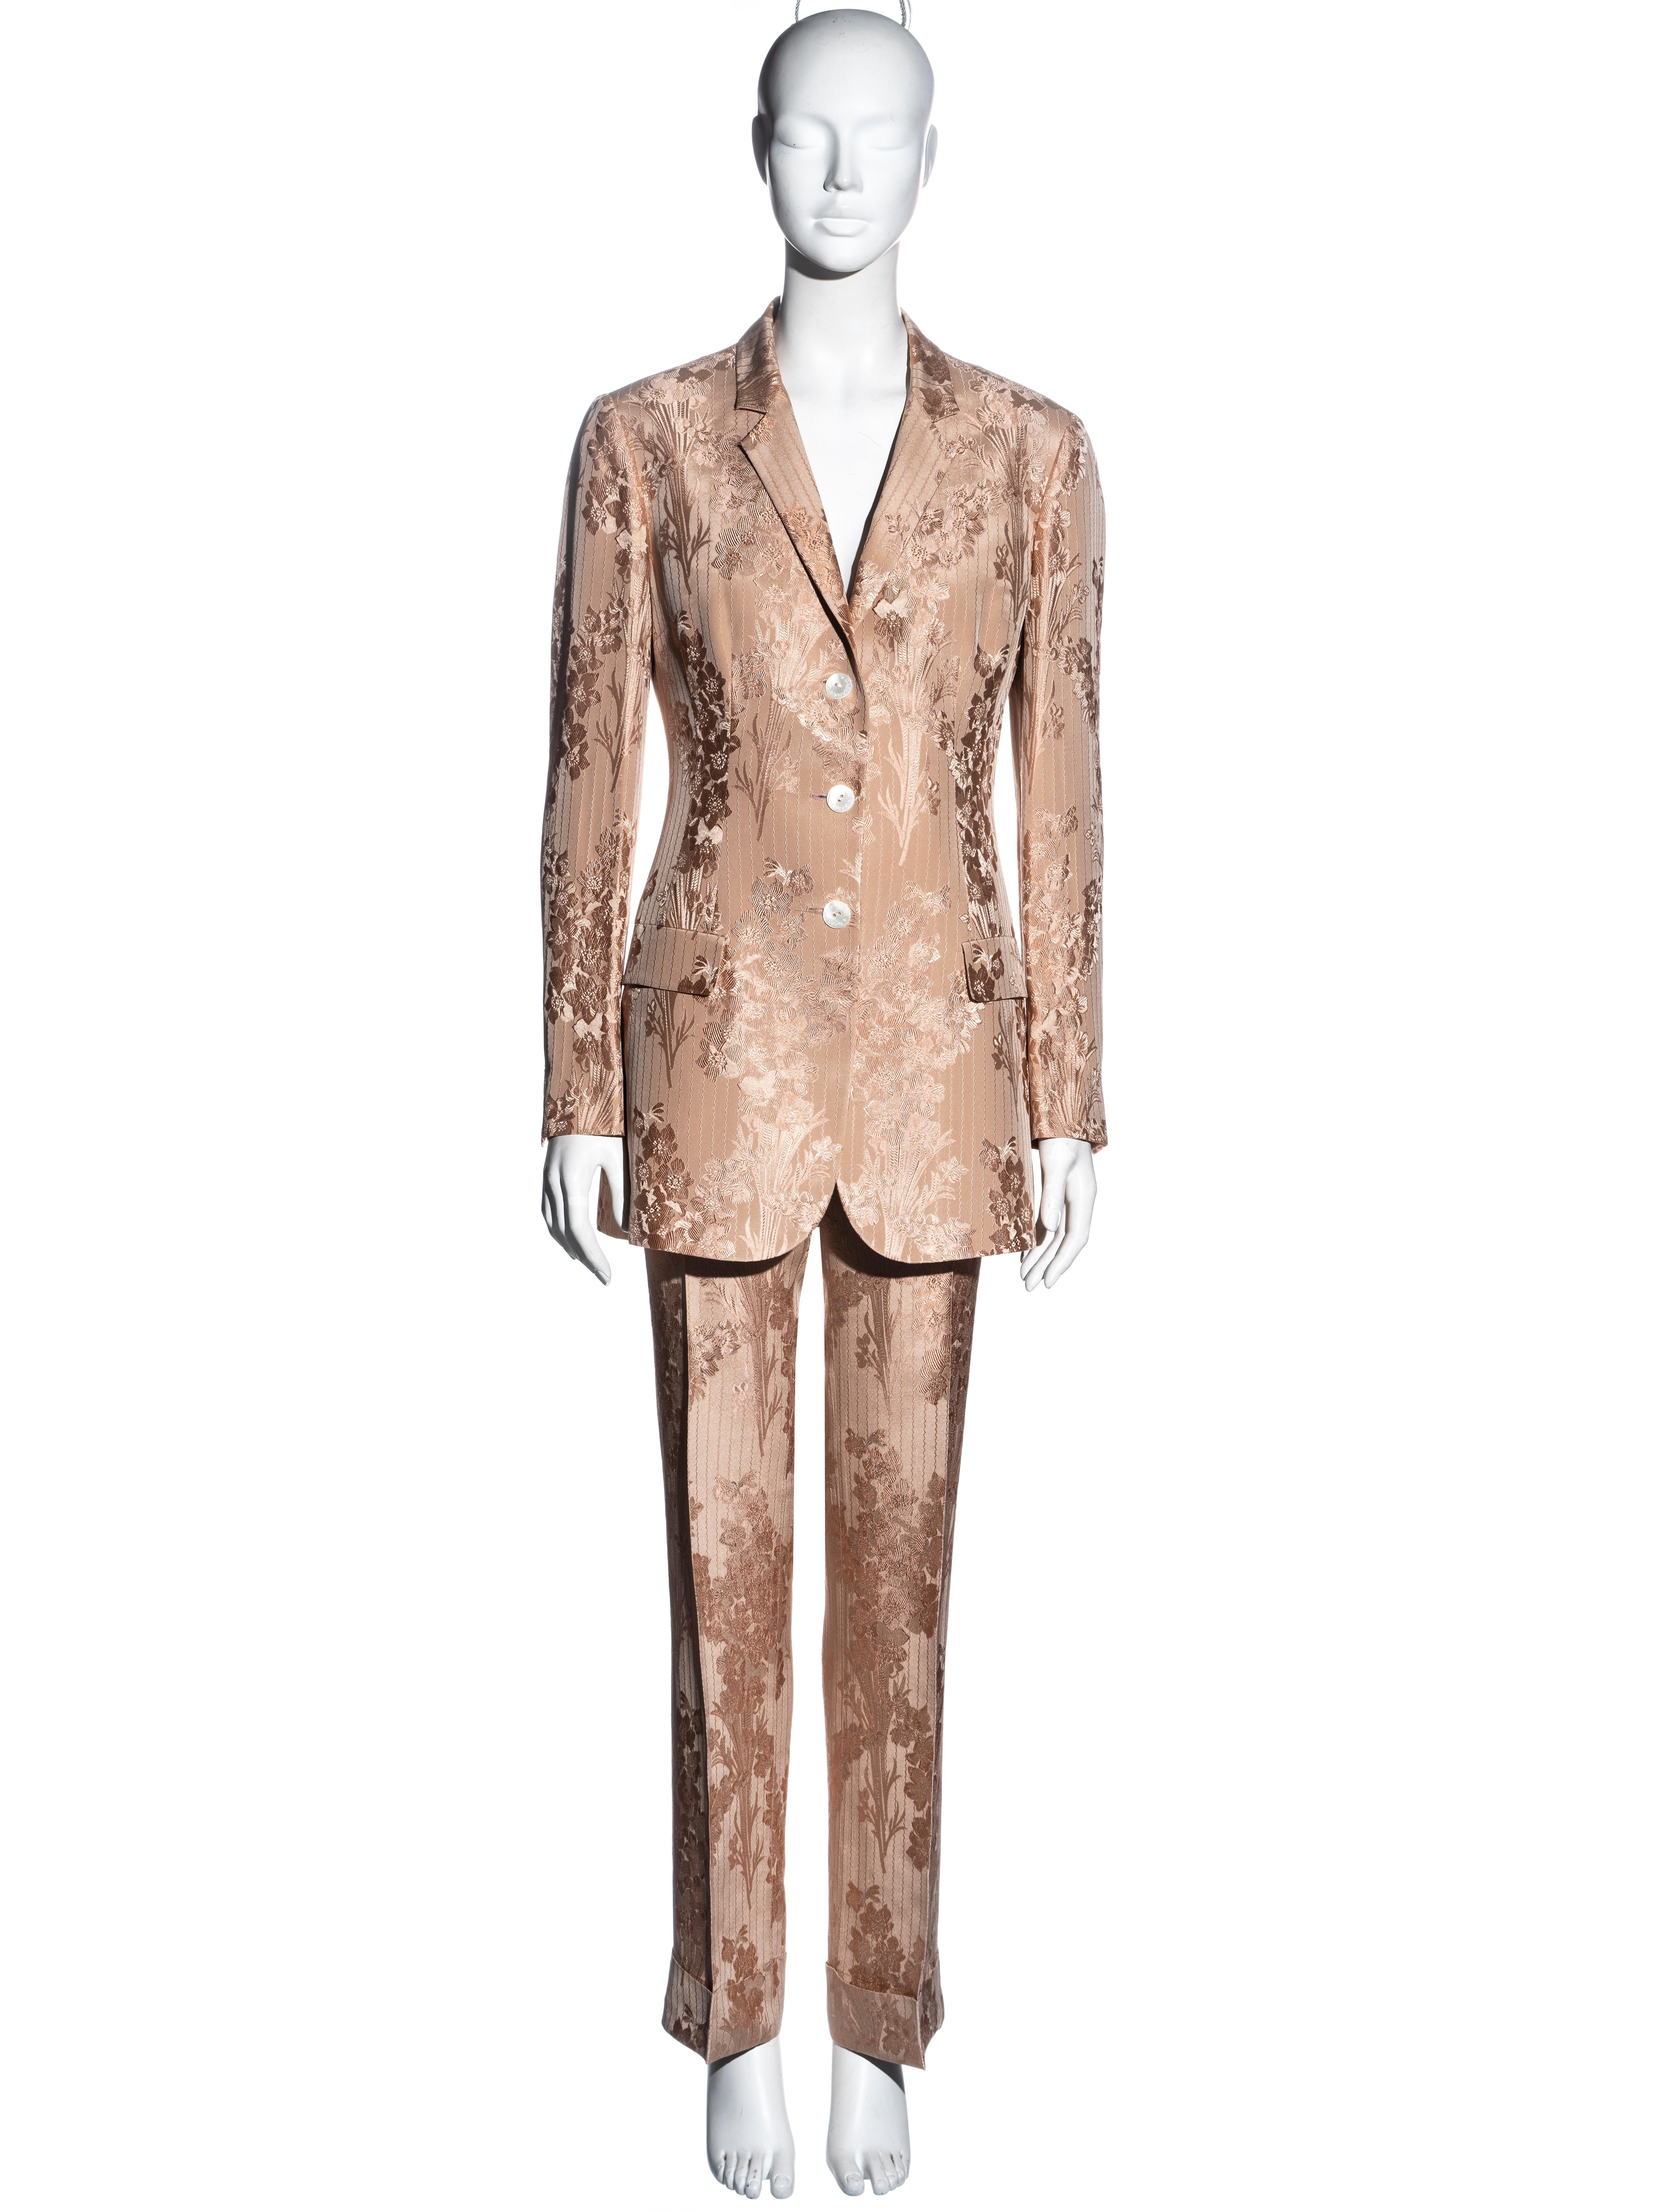 ▪ Dolce & Gabbana pant suit 
▪ Peachy pink silk and viscose blend floral brocade 
▪ Single-breasted blazer jacket 
▪ High-rise slim-fit trousers with turn-ups 
▪ Mother-of-pearl buttons 
▪ Silk lining
▪ Jacket: IT 42 - FR 38 - UK 10 - US 6
▪ Pants: